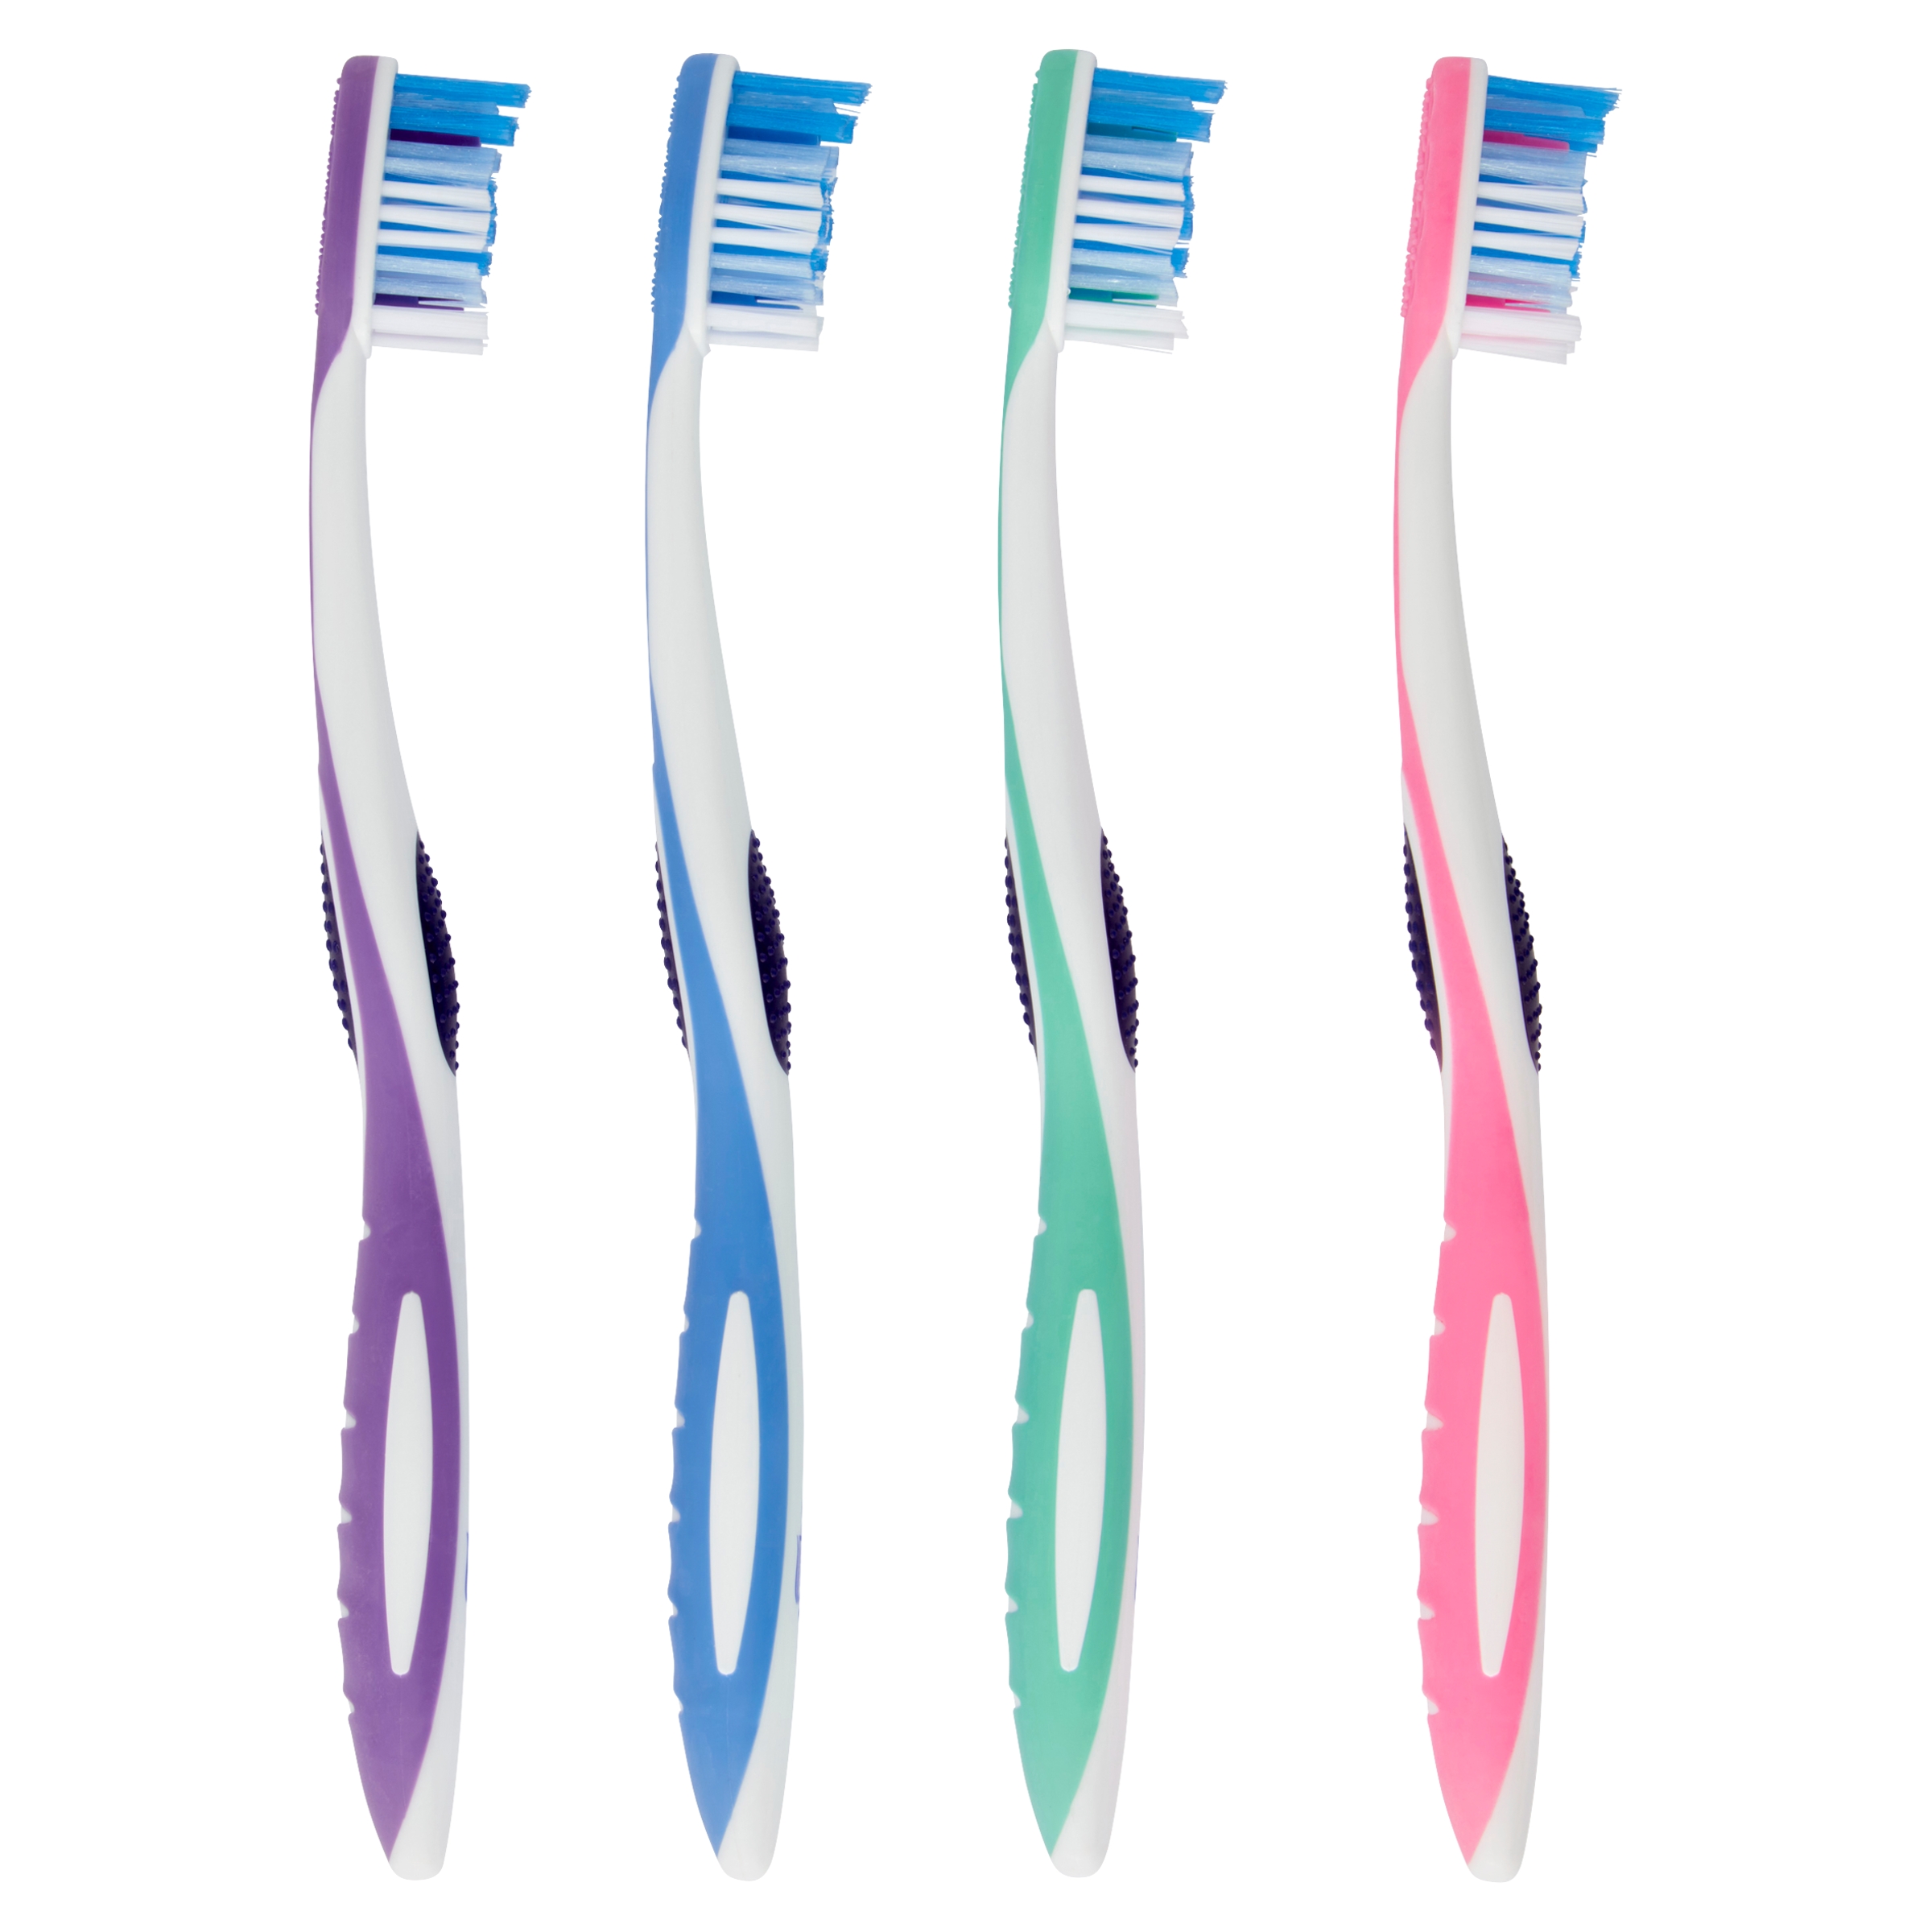 Equate Rotation, Adult Manual Soft Bristle Toothbrush with Tongue and Cheek Cleaner, 4 Count - image 6 of 9